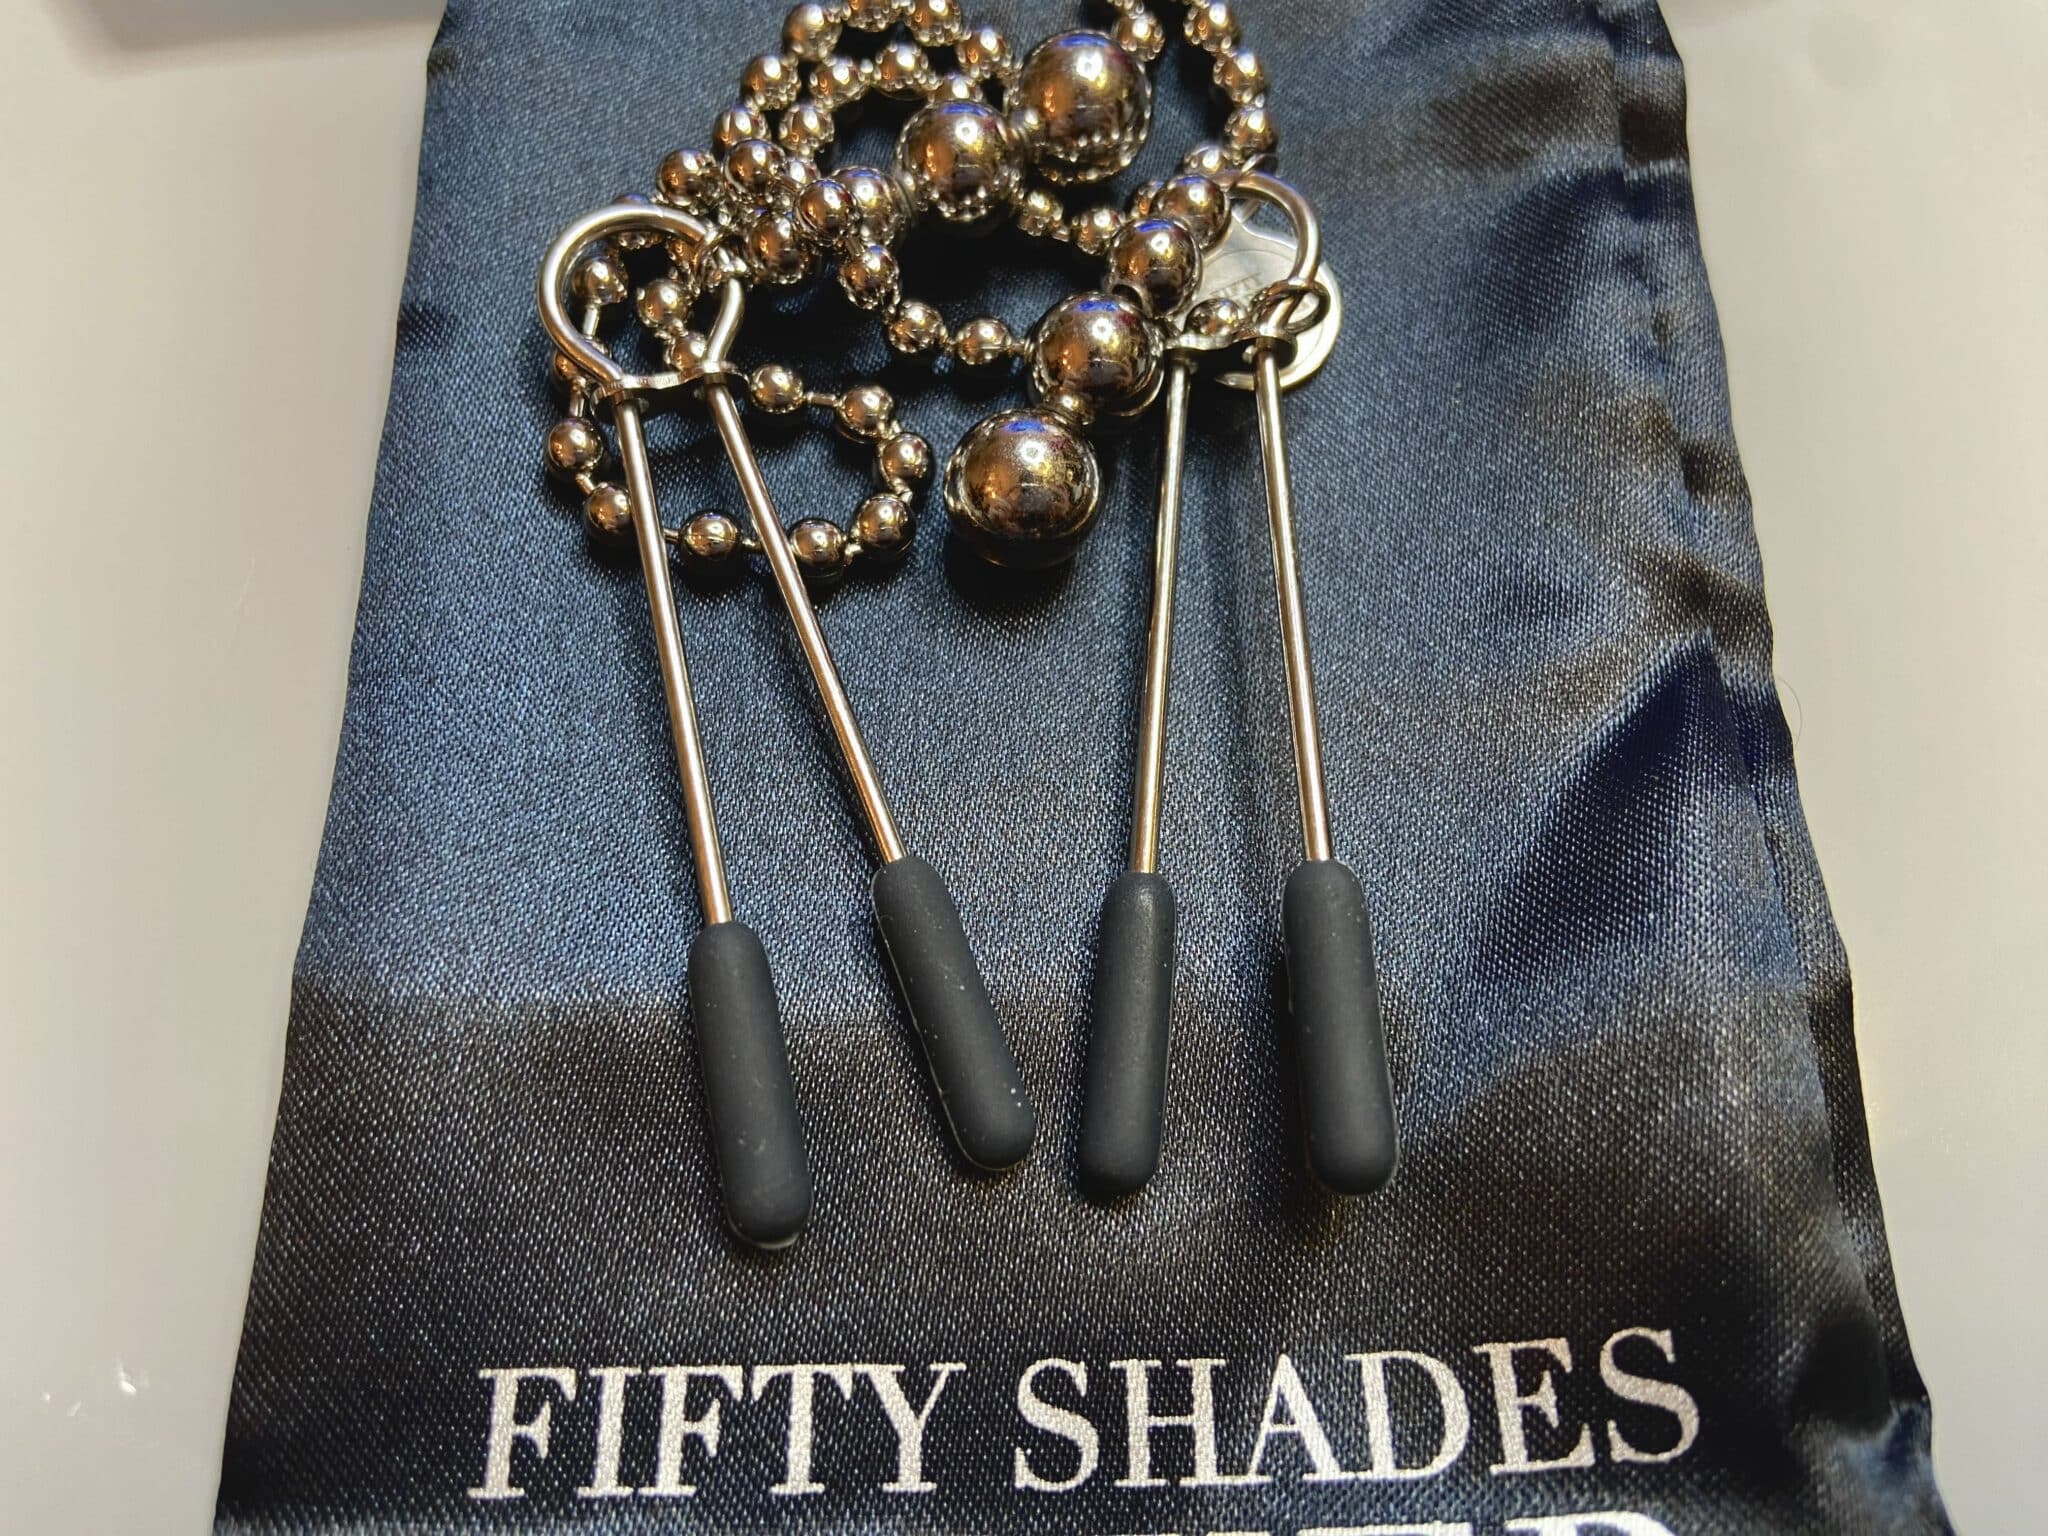 Fifty Shades Darker At My Mercy Chained Nipple Toys. Slide 5